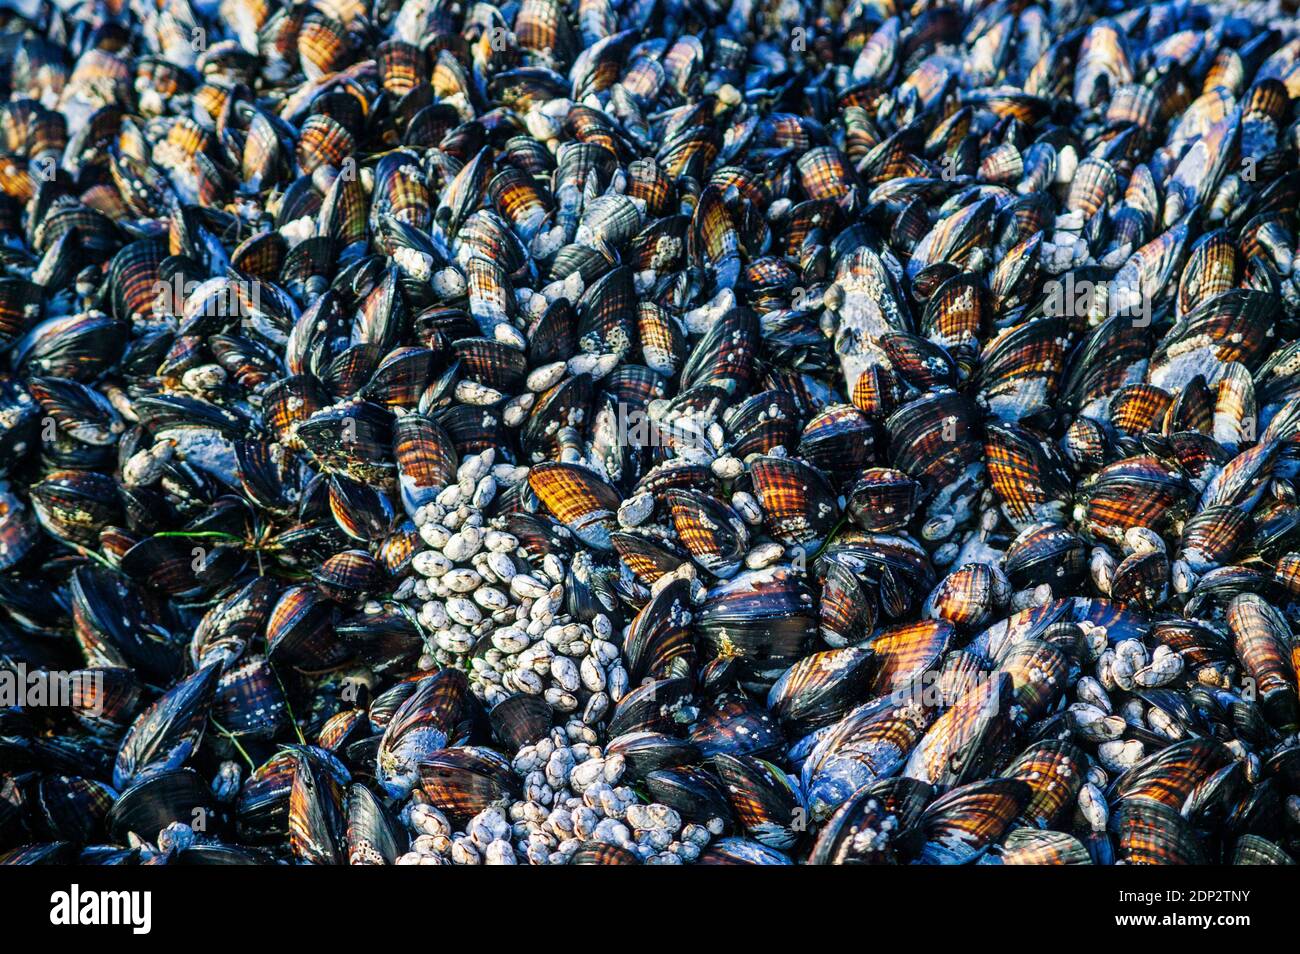 Abstract close-up of sea shells; mollusks; mussels; northern California beach; USA Stock Photo